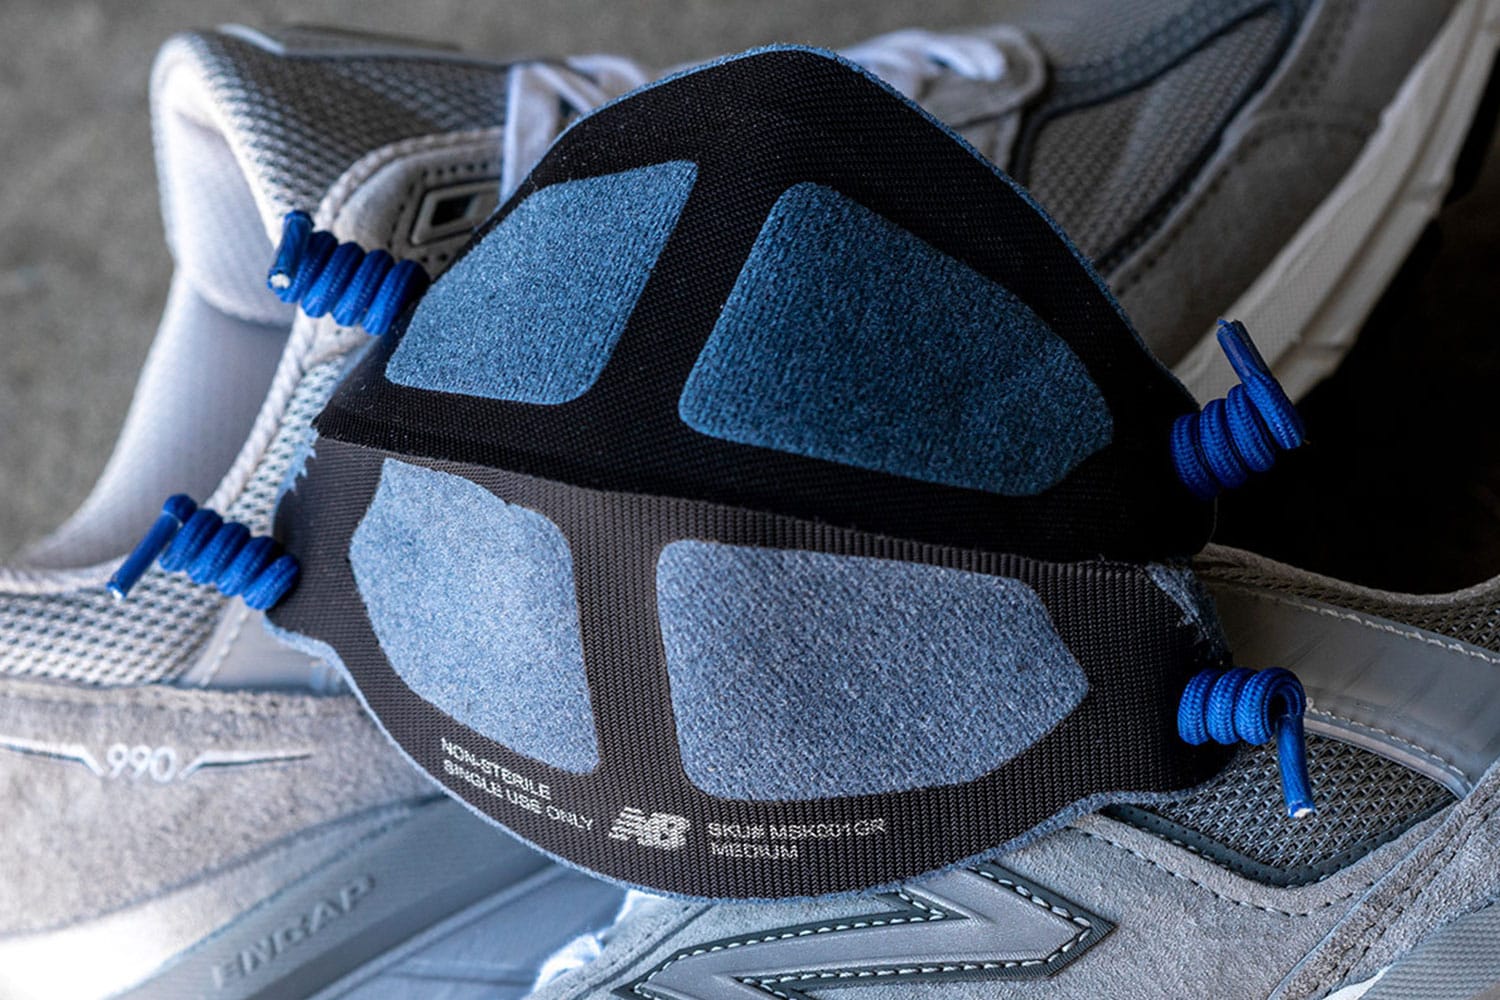 New Balance Non-Surgical Face Masks for Public | HYPEBEAST